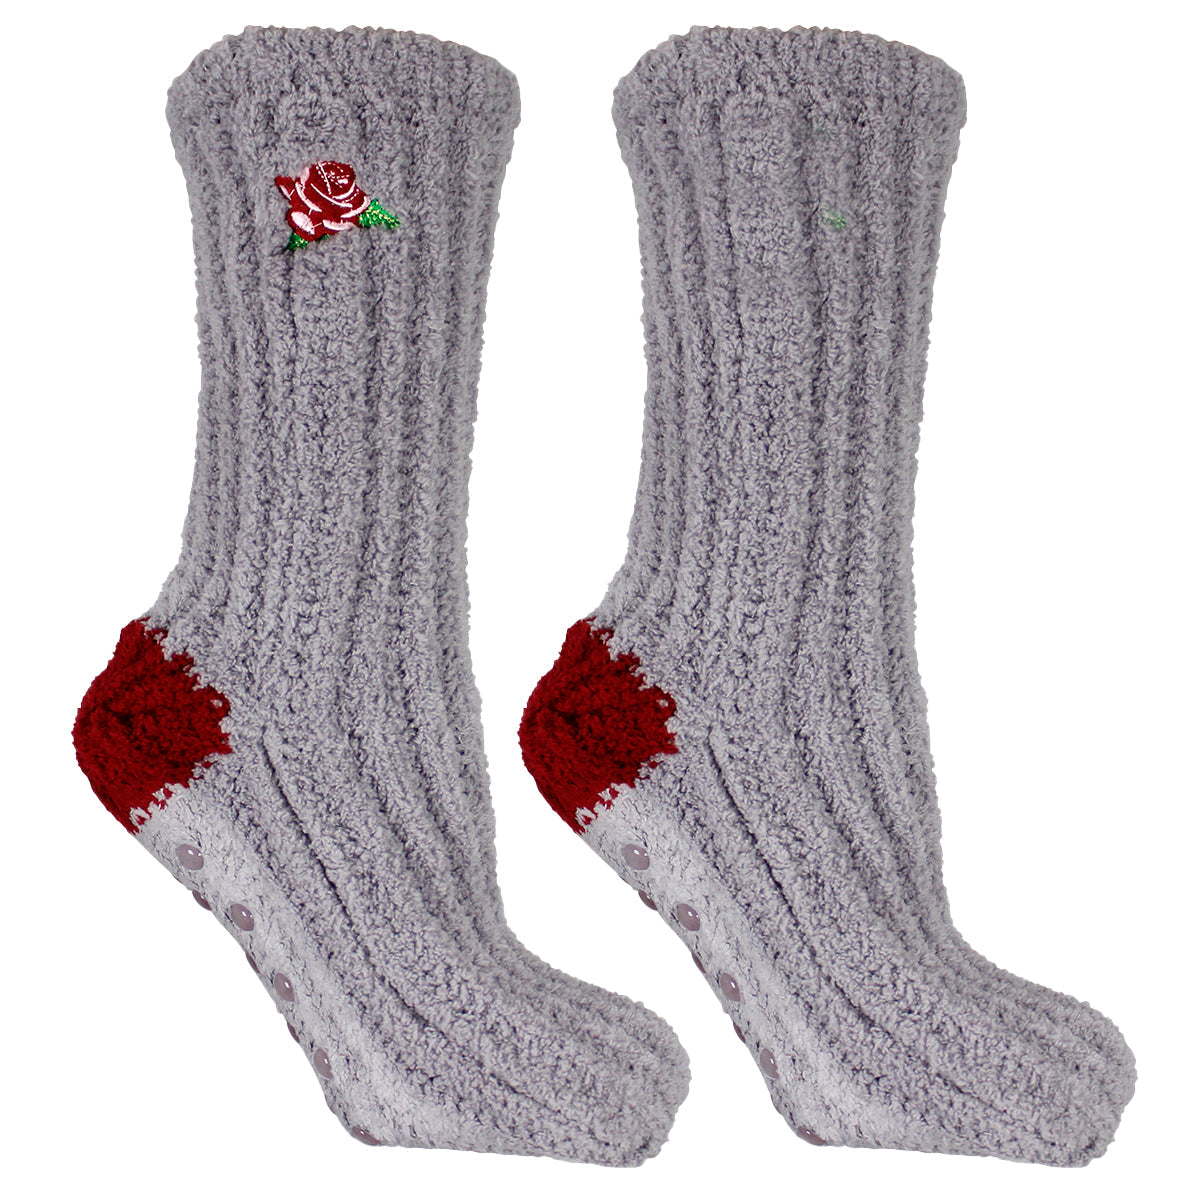 Non-Skid Warm Soft and Fuzzy "LOVE" Slouch Slipper Socks With Lavender Infused